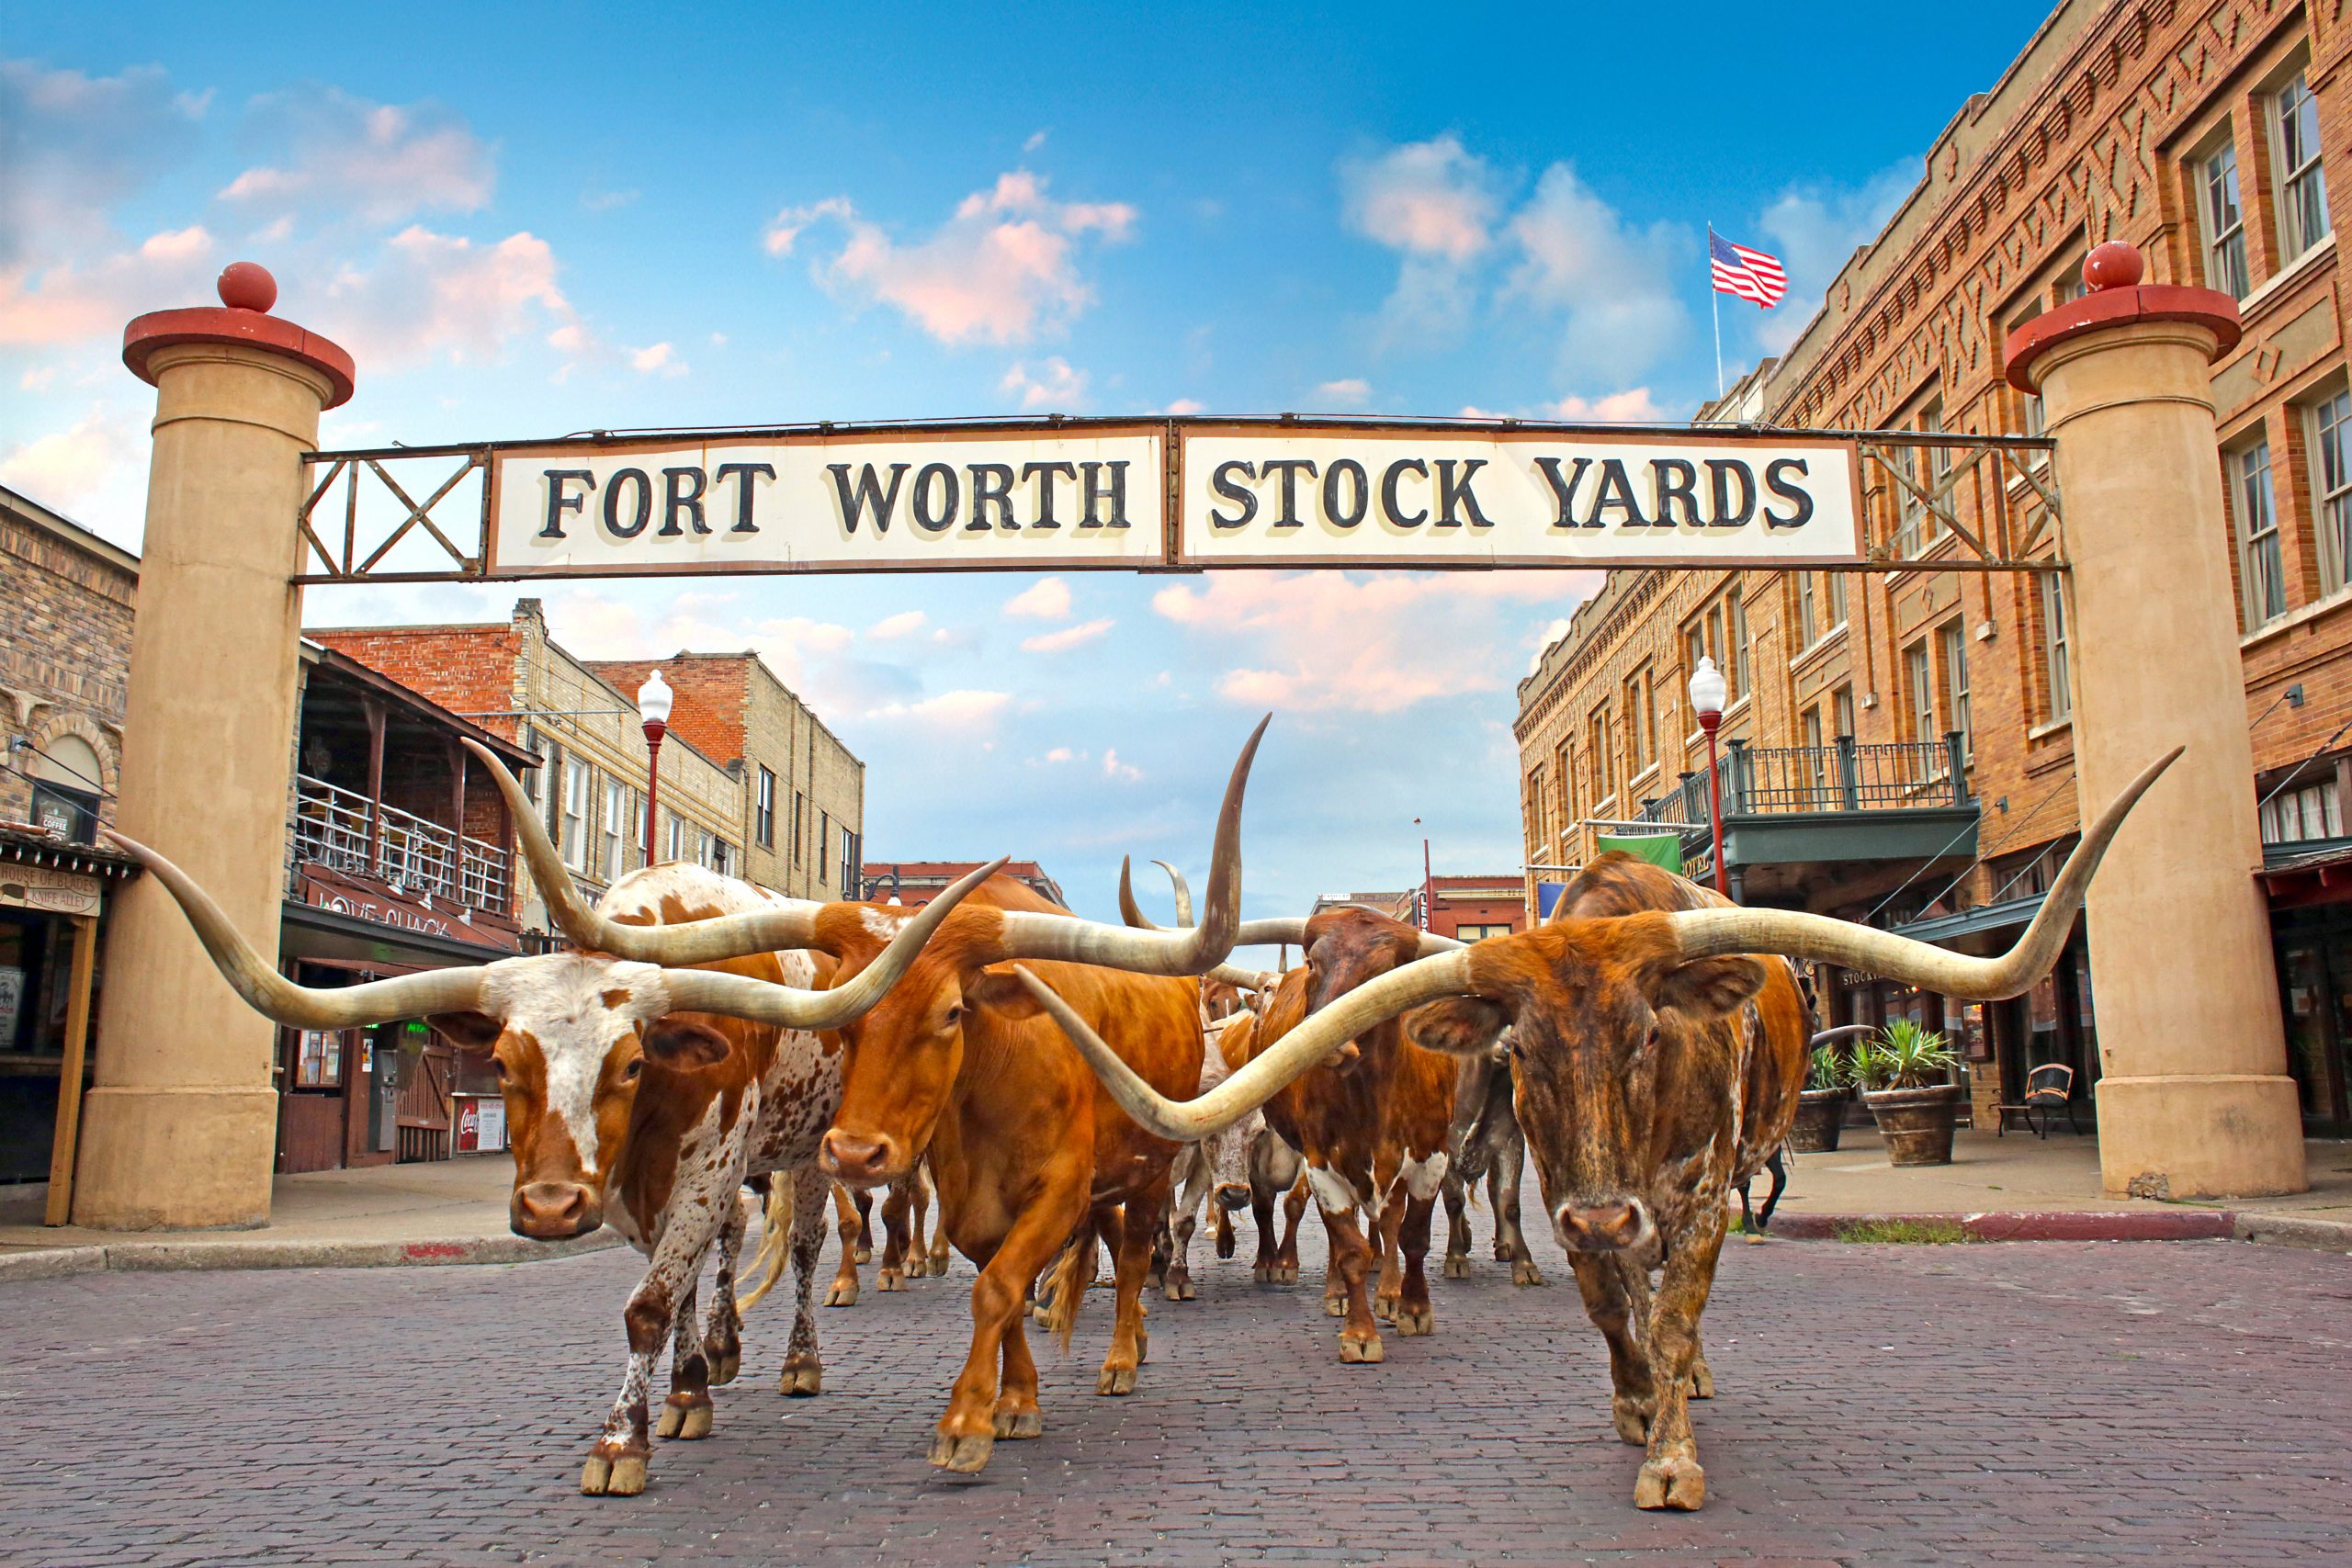 Mule Alley in the Fort Worth Stockyards offers Wrangler NFR Events